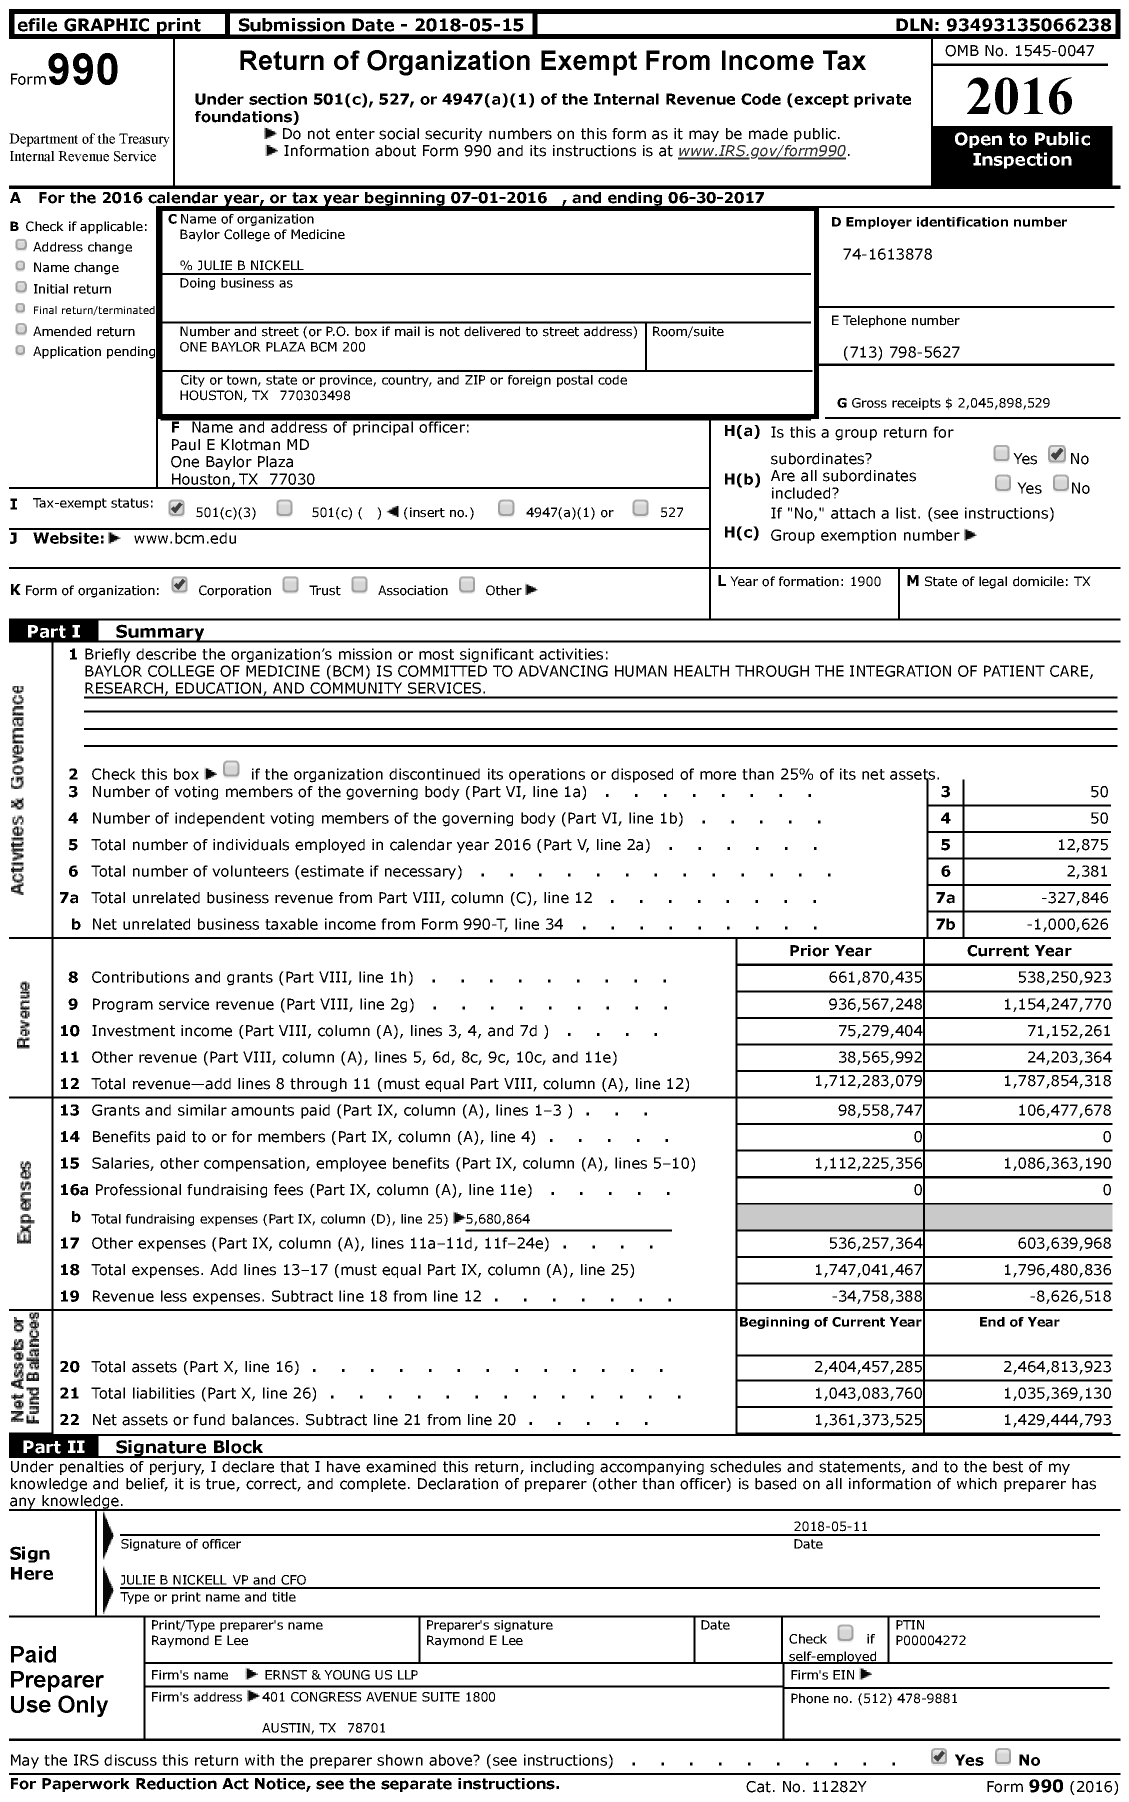 Image of first page of 2016 Form 990 for Baylor College of Medicine (BCM)